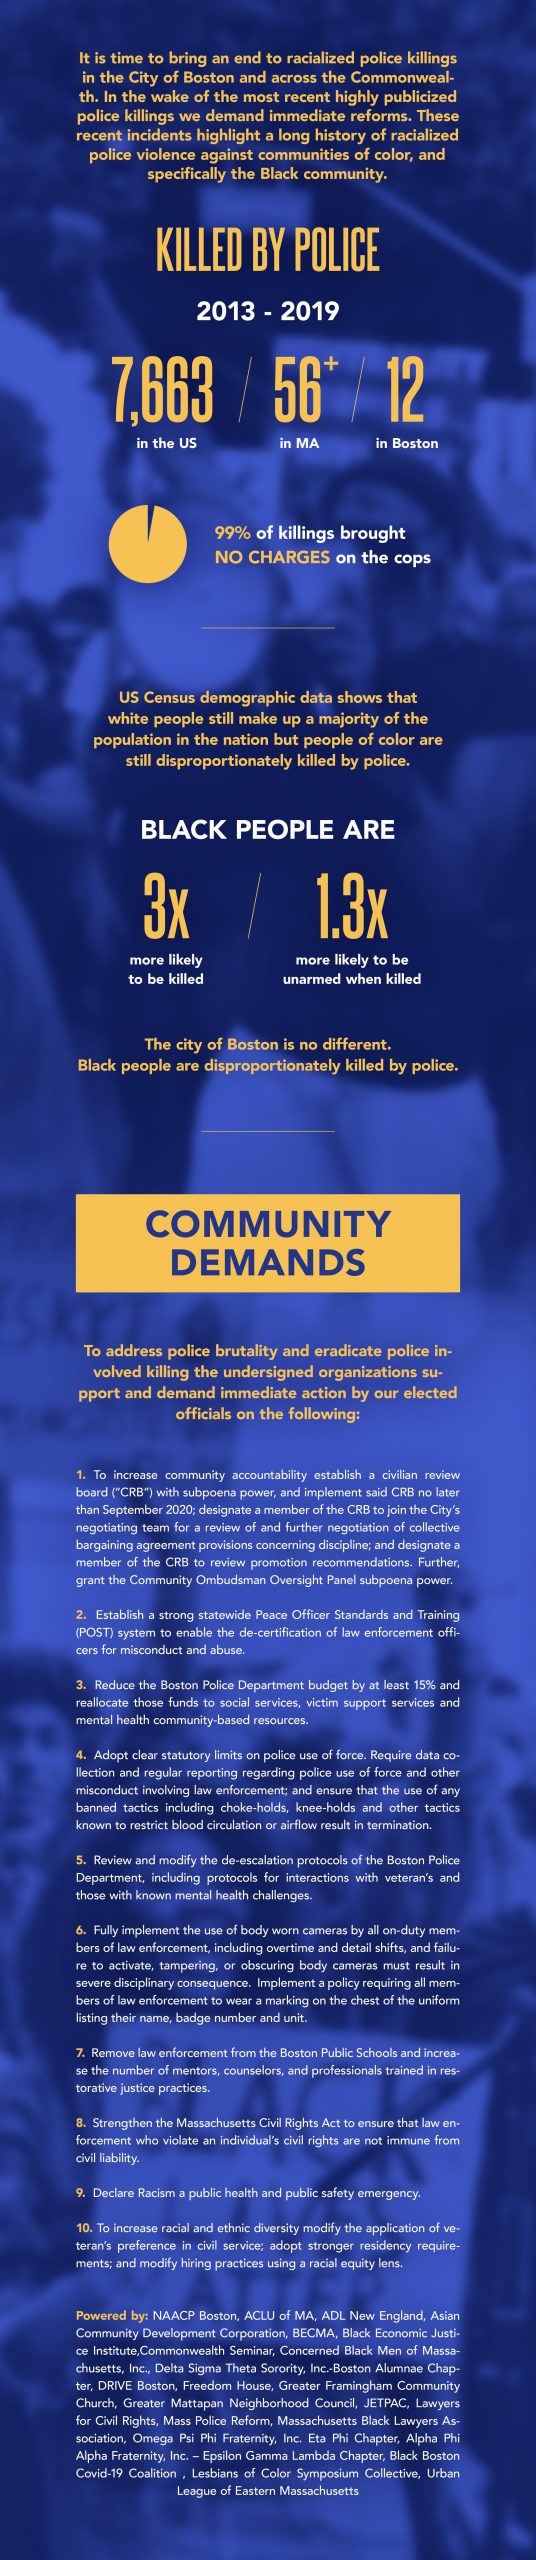 Body Cameras Must Be Used with Strong Policies